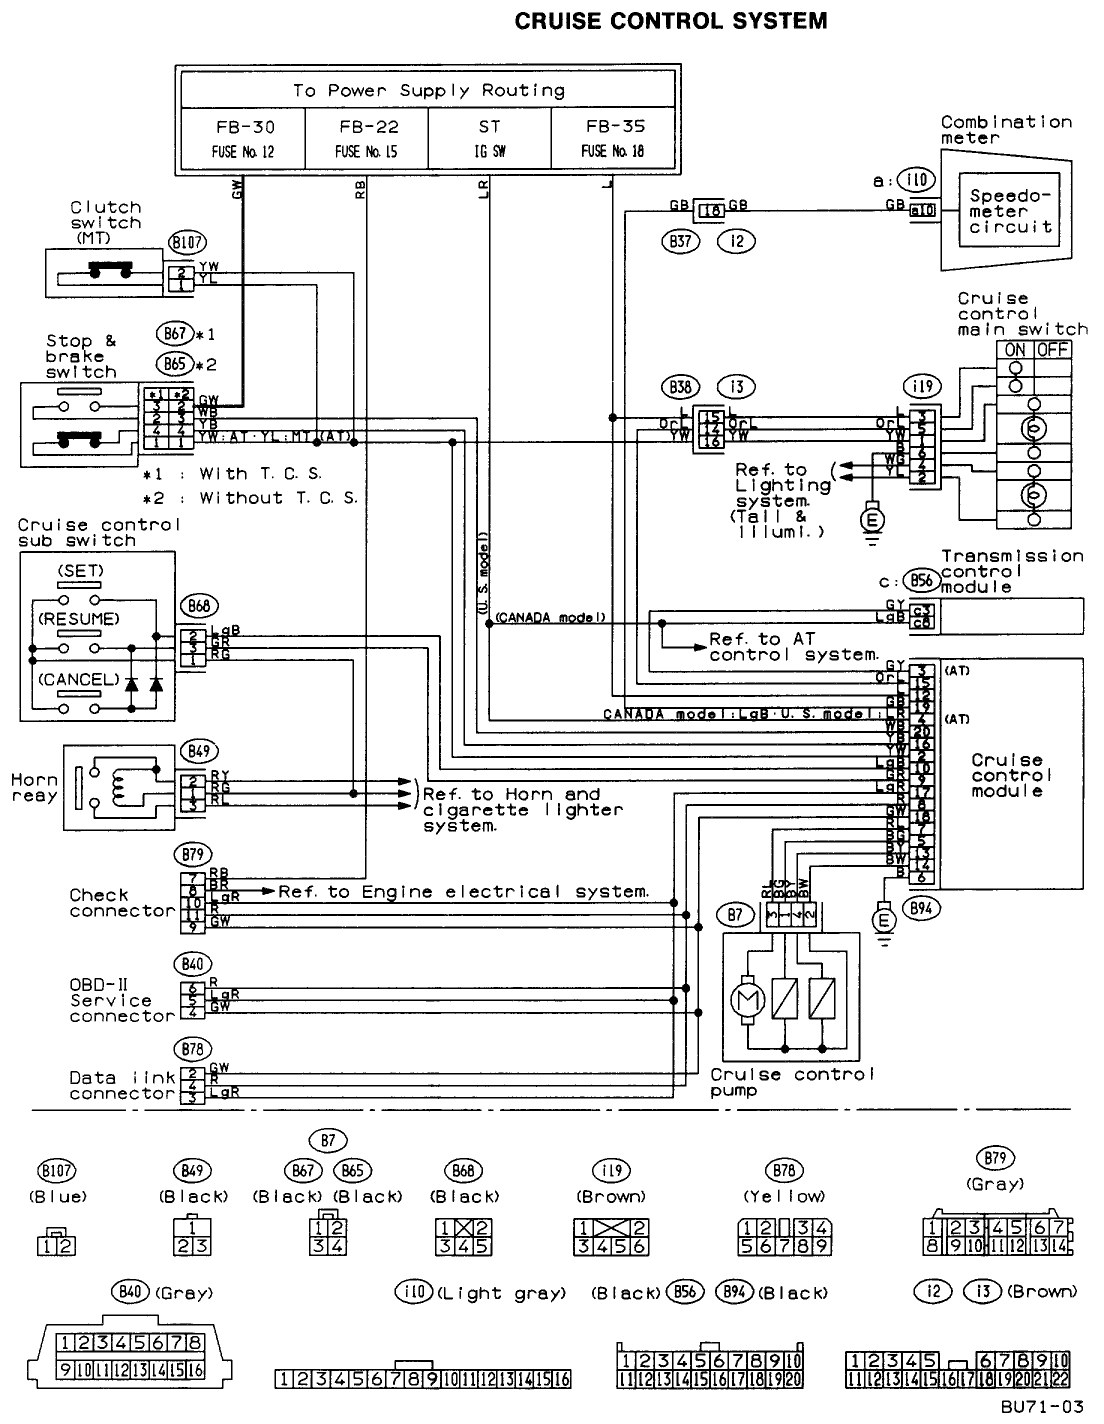 cruise-control-schematic-96d.gif